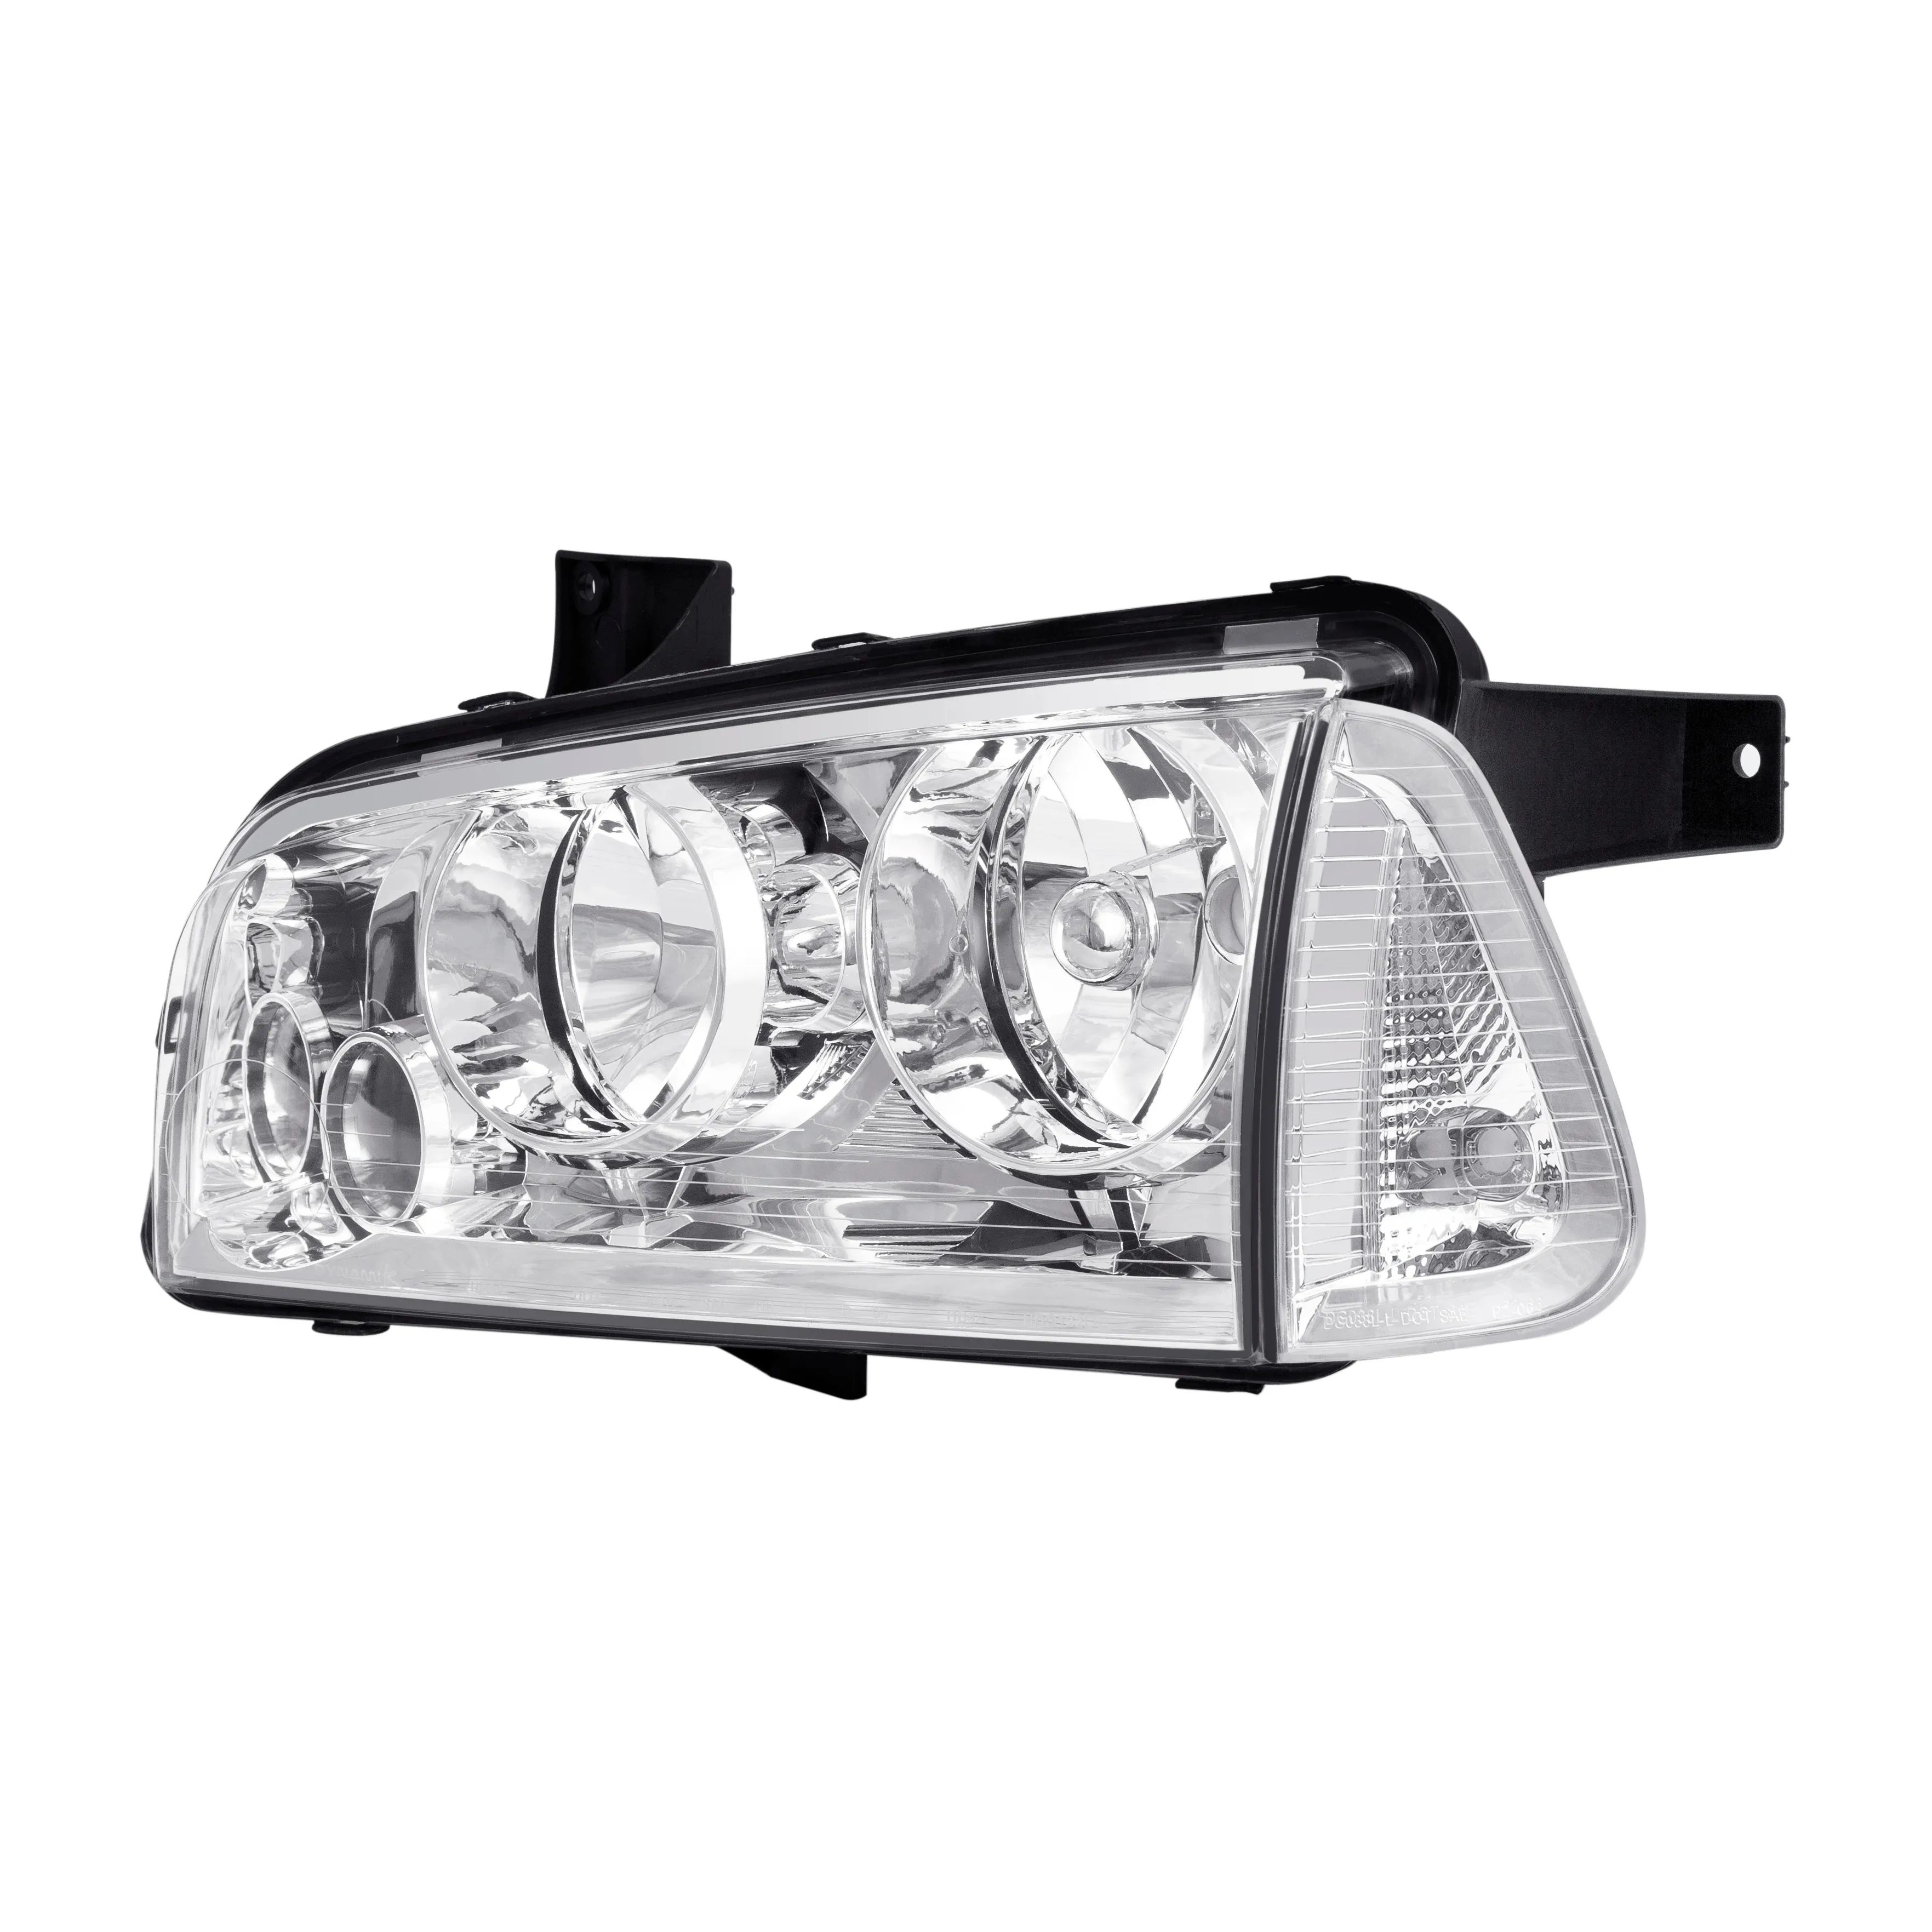 Hot-selling Front light Factory Style Headlights FOR 2006-2010 Dodge Charger (Chromed / Clear)